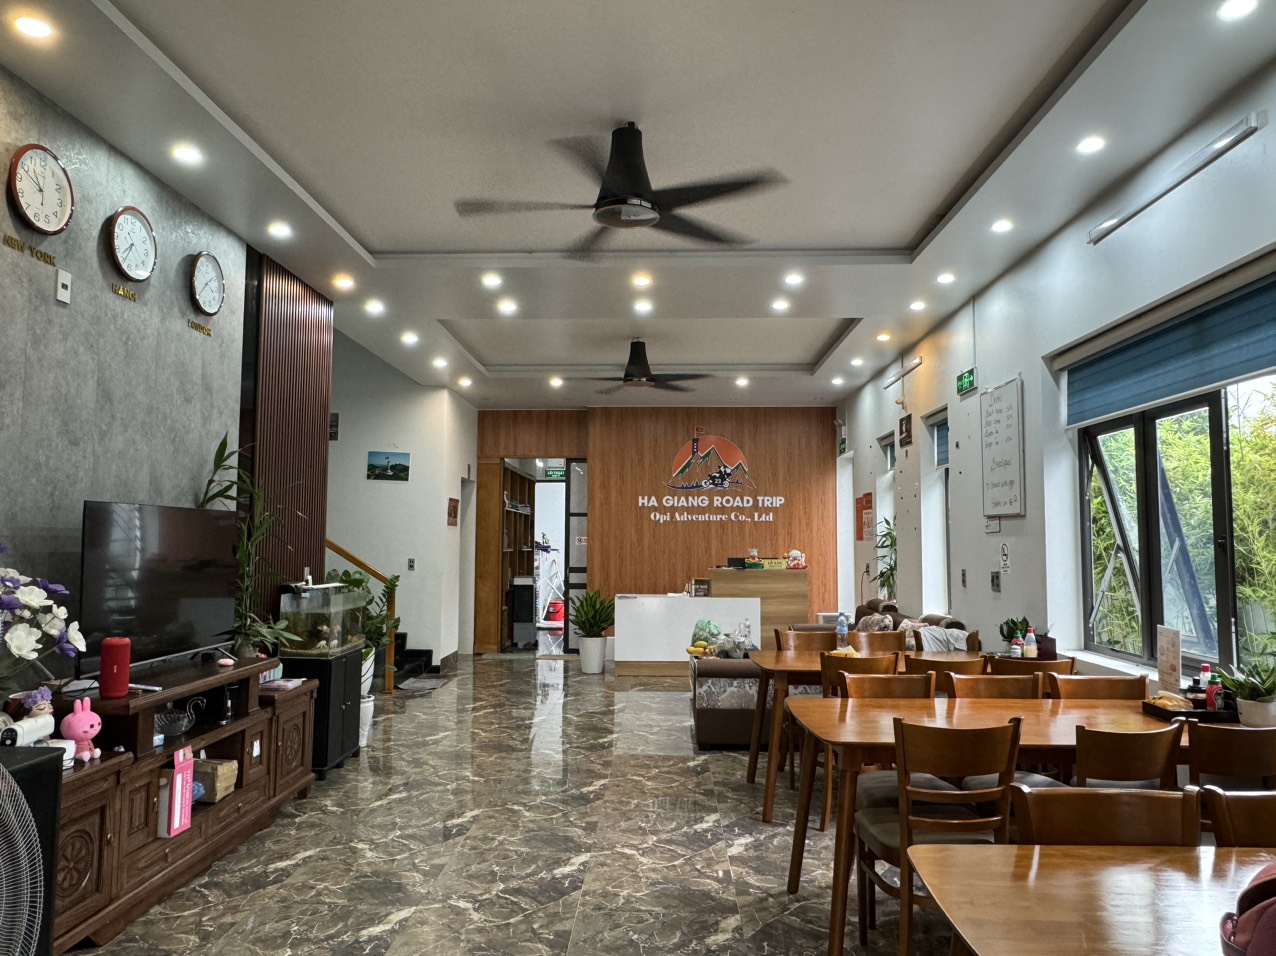 Reception and Relax Area of Ha Giang Road Trip Hostel